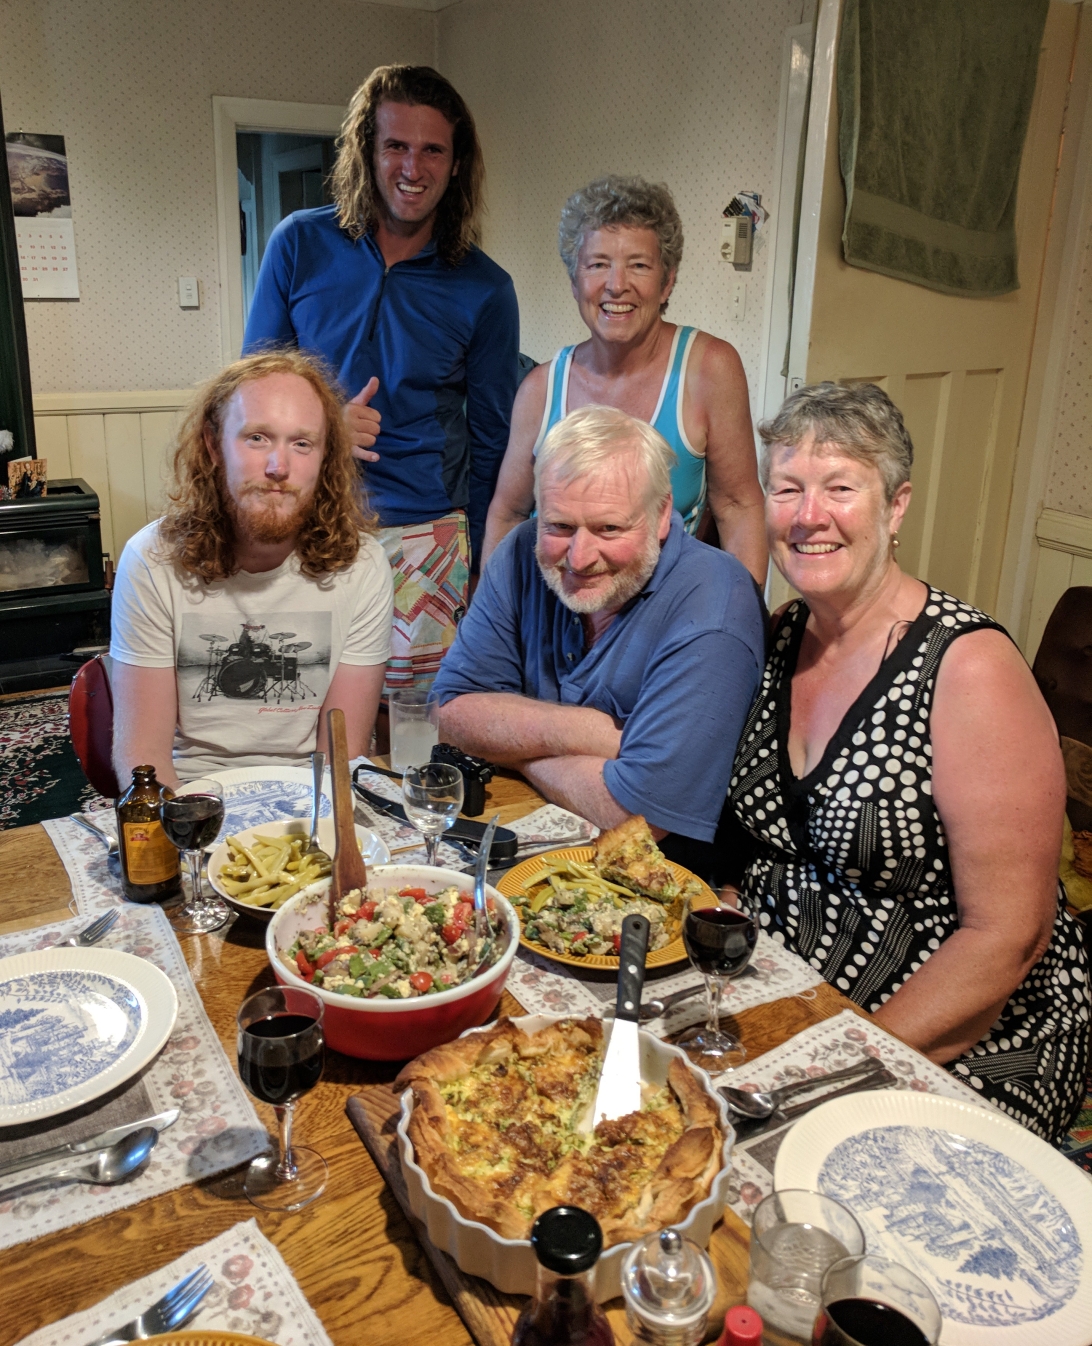 194-lovely-team-dinner-that-last-night-with-alec-alison-their-son-james-and-some-bicyclists-from-france1.jpg